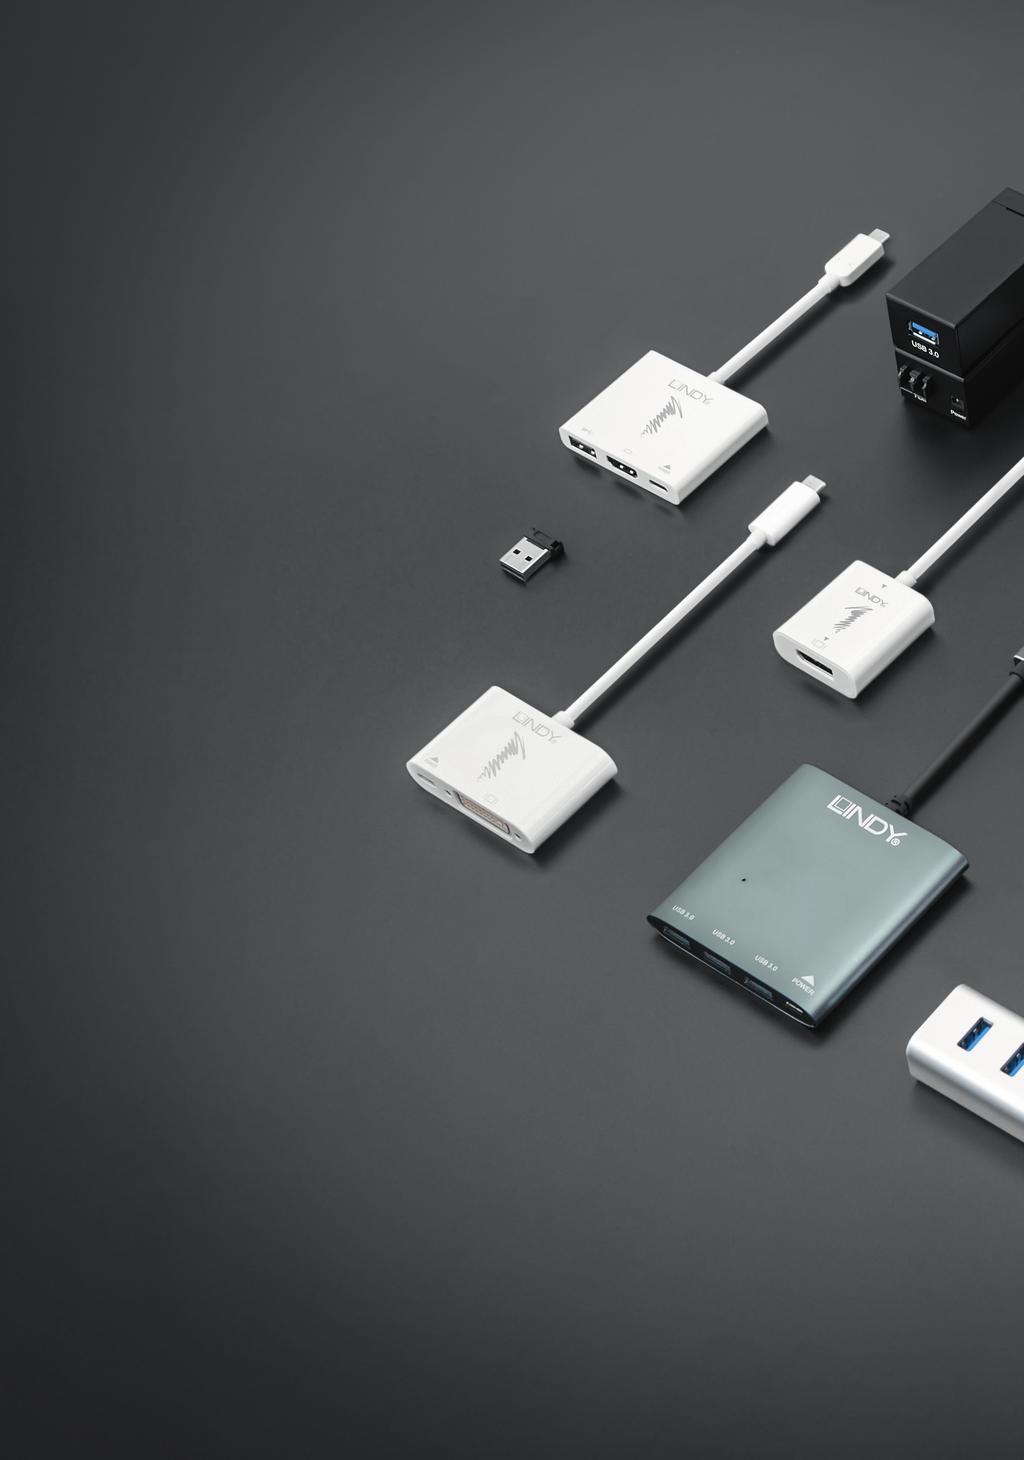 ConneCtor of the future USB-c Features POWER DATA Transfer large amounts of data at twice the speed compared to USB 3.1 Gen 1 (USB 3.0). Transfer rates: USB 3.1 Gen 2: SuperSpeed+: up to 10Gbps USB 3.